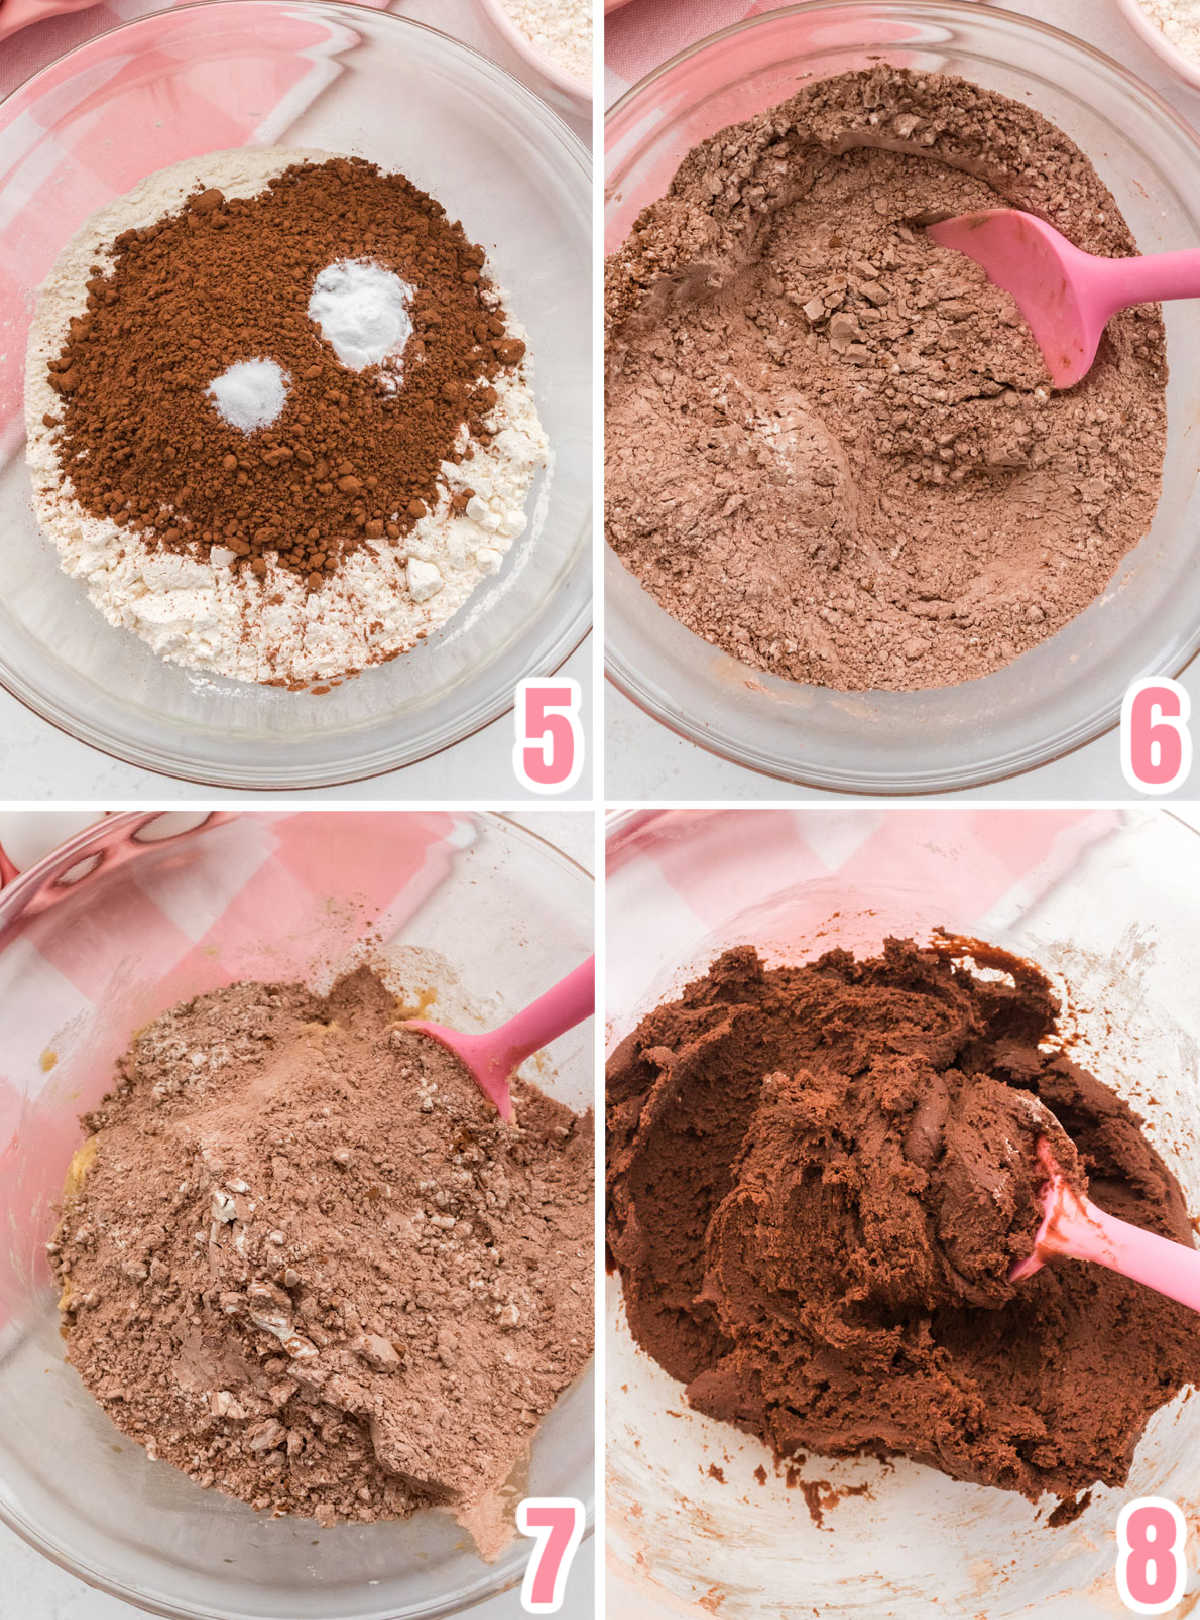 Collage image showing the steps for mixing the dry ingredients into the Cookie dough.